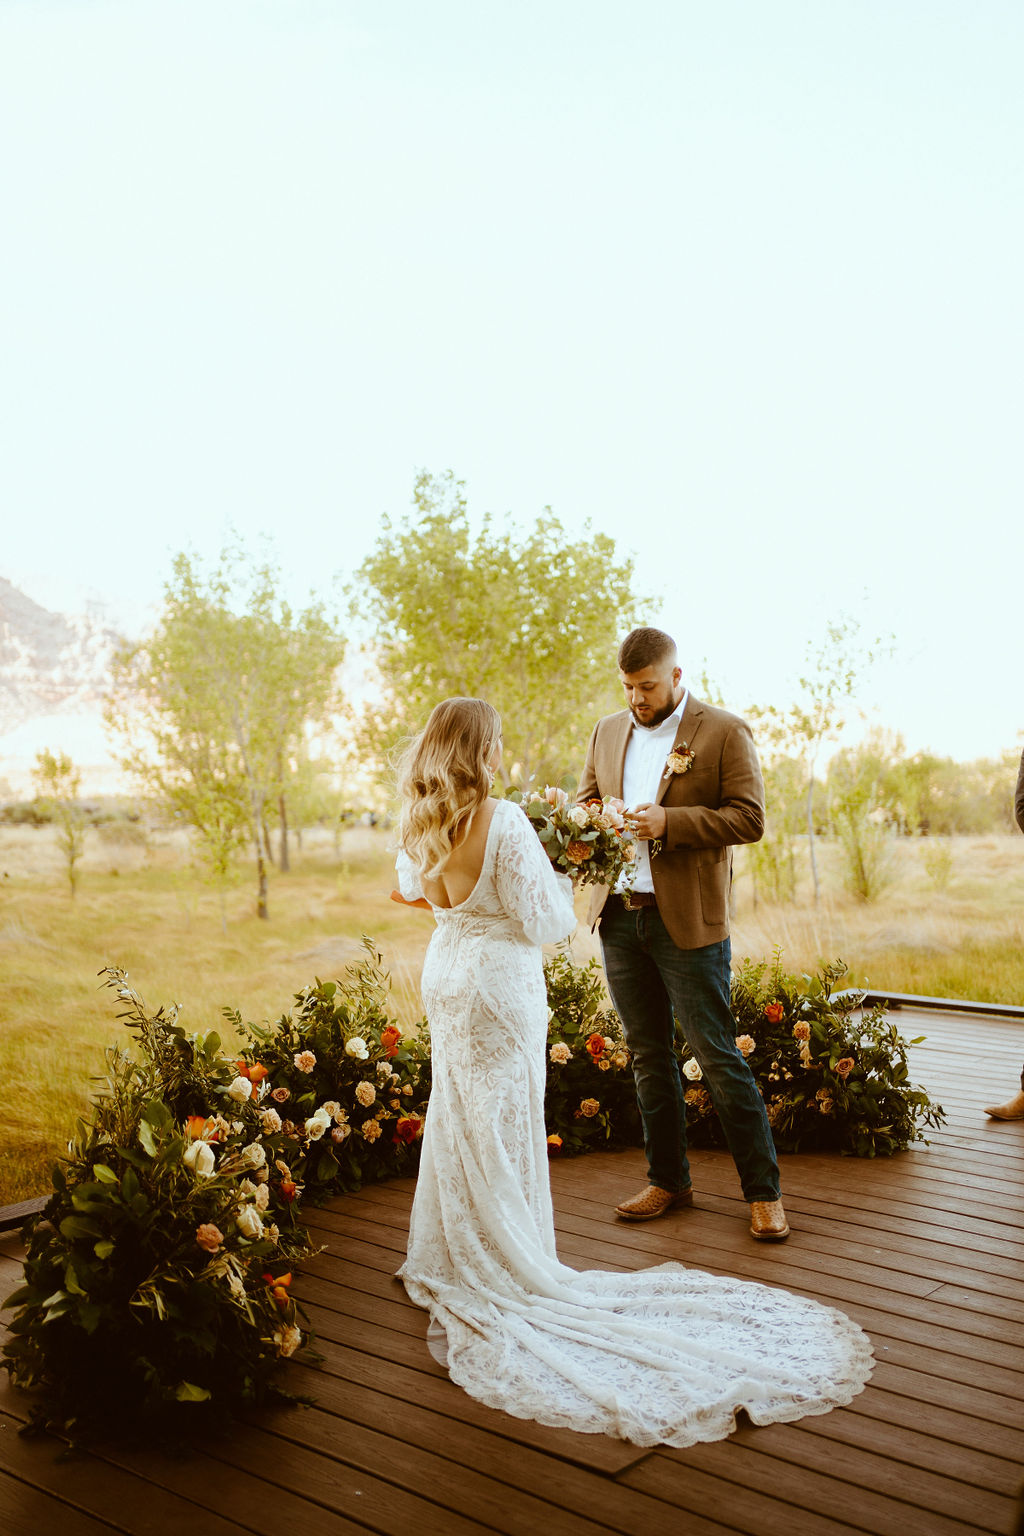 Seeing the grooms front as he reads the vows. He wears a white shirt with no tie and brown suit jacket. Dark fitted blue jeans and glossy tan dress shoes. The bride faces him. The back white lace wedding dress with puffy sleeves swoops low down her back. 